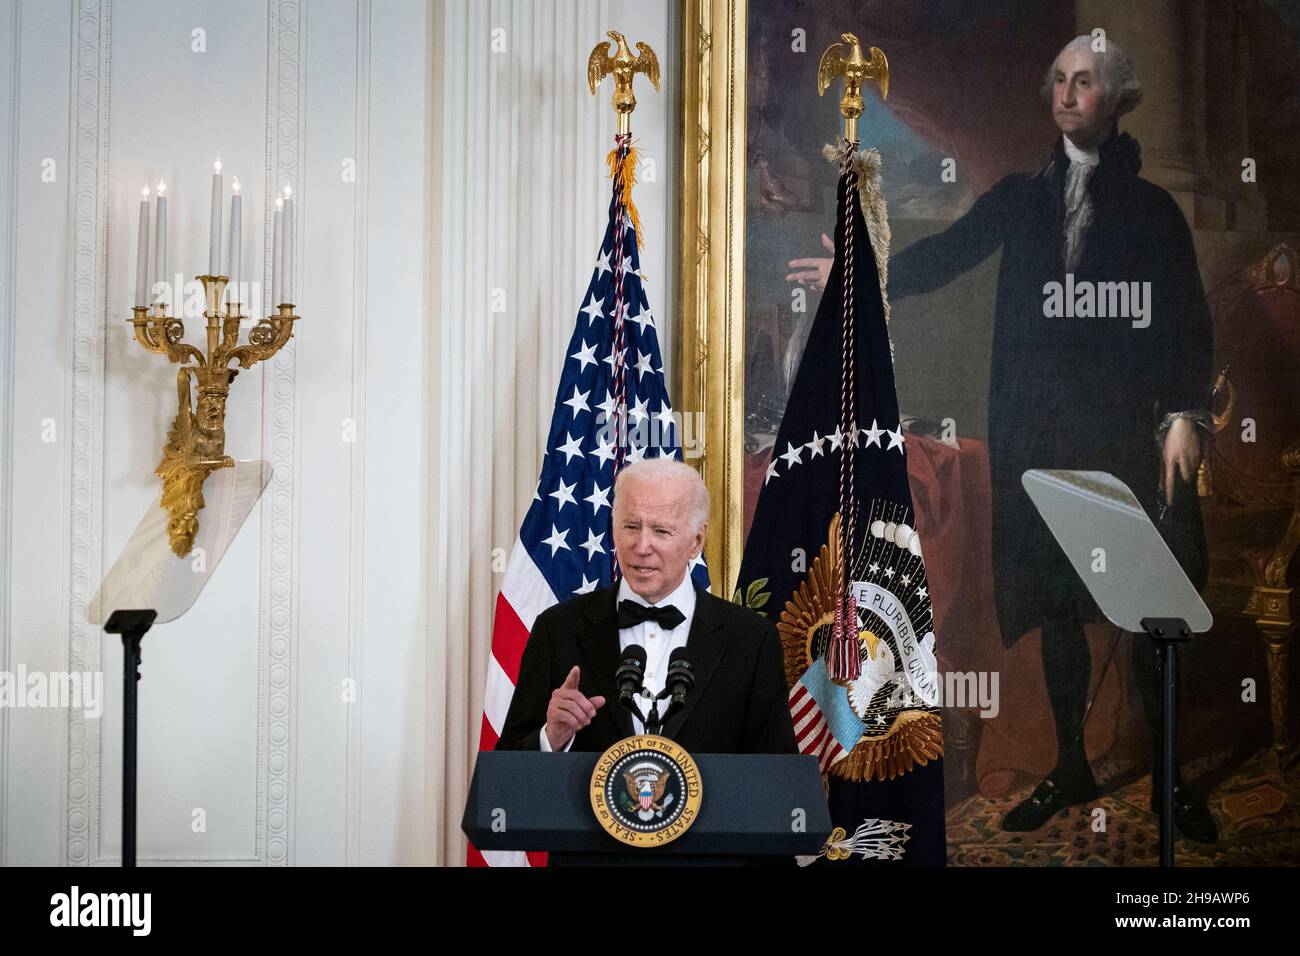 Washington, DC, U.S., on Sunday, Dec. 5, 2021. U.S. President Joe Biden speaks during the the Kennedy Center Honorees Reception in the East Room of the White House in Washington, DC, U.S., on Sunday, Dec. 5, 2021. The John F. Kennedy Center for the Performing Arts 44th Honorees for lifetime artistic achievements include operatic bass-baritone Justino Diaz, Motown founder Berry Gordy, Saturday Night Live creator Lorne Michaels, actress Bette Midler, and singer-songwriter Joni Mitchell. Credit: Al Drago/Pool via CNP /MediaPunch Stock Photo